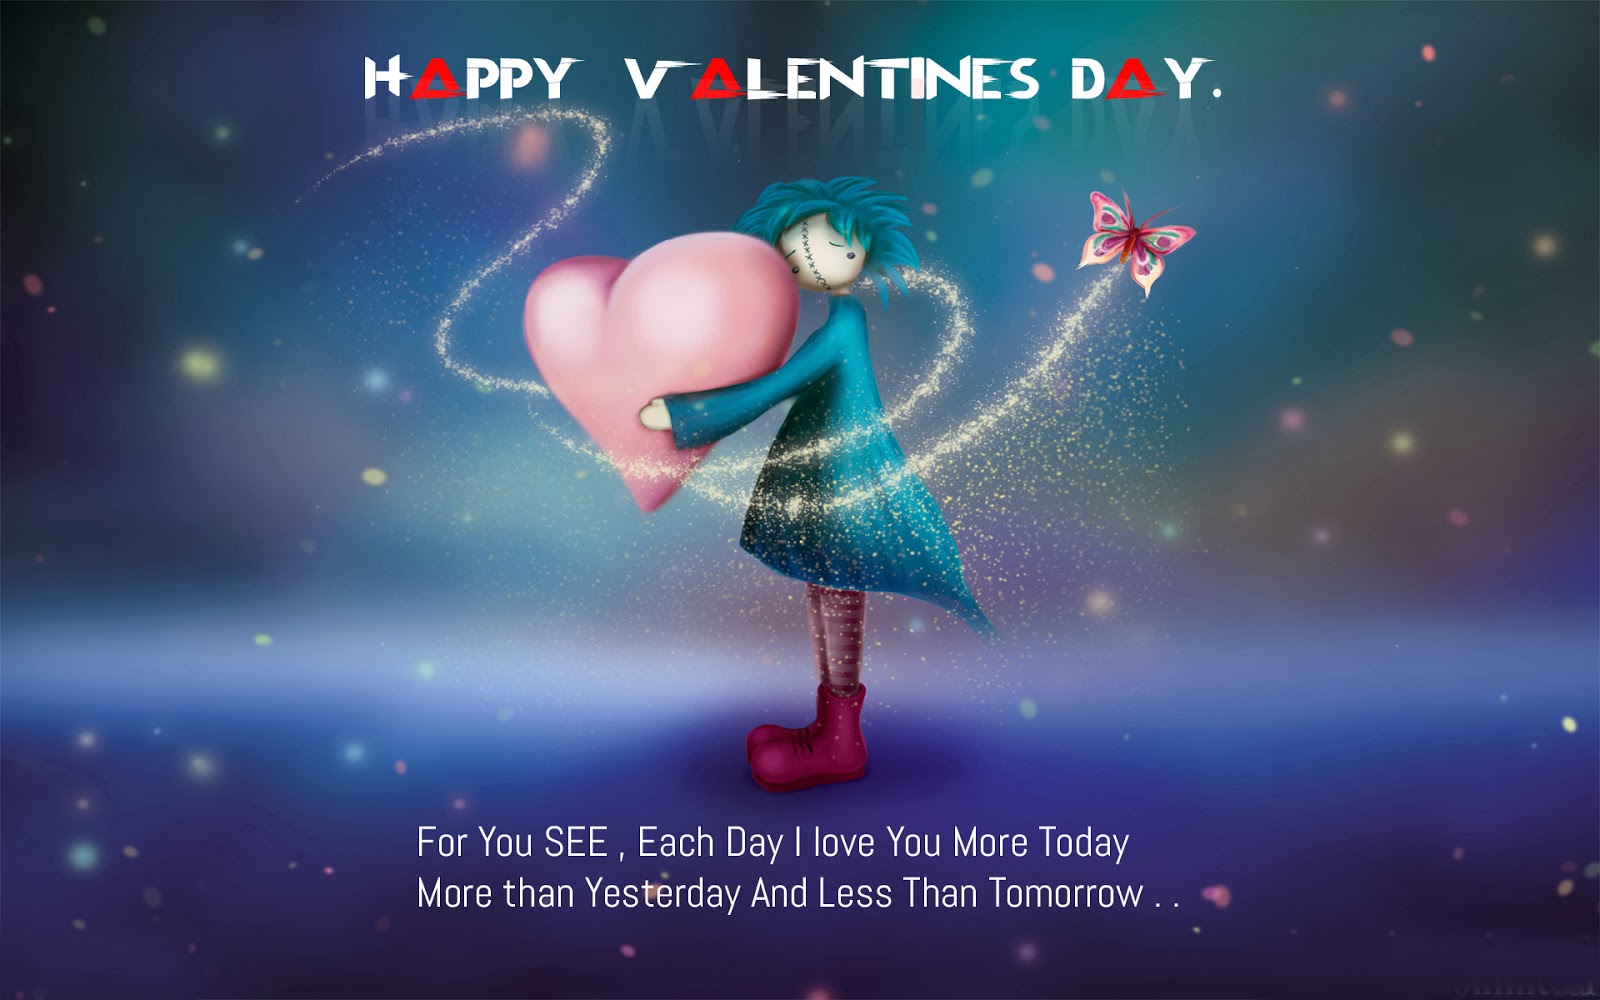 TAgs: happy valentines day wallpaper,  happy valentines day background,  happy valentines day photos,  happy valentines day hd wallpaper,  valentine wallpaper 2014,  romantic couple wallpapers,  valentine special wallpaper,  valentine romantic wallpaper,  romantic wallpaper 2014,